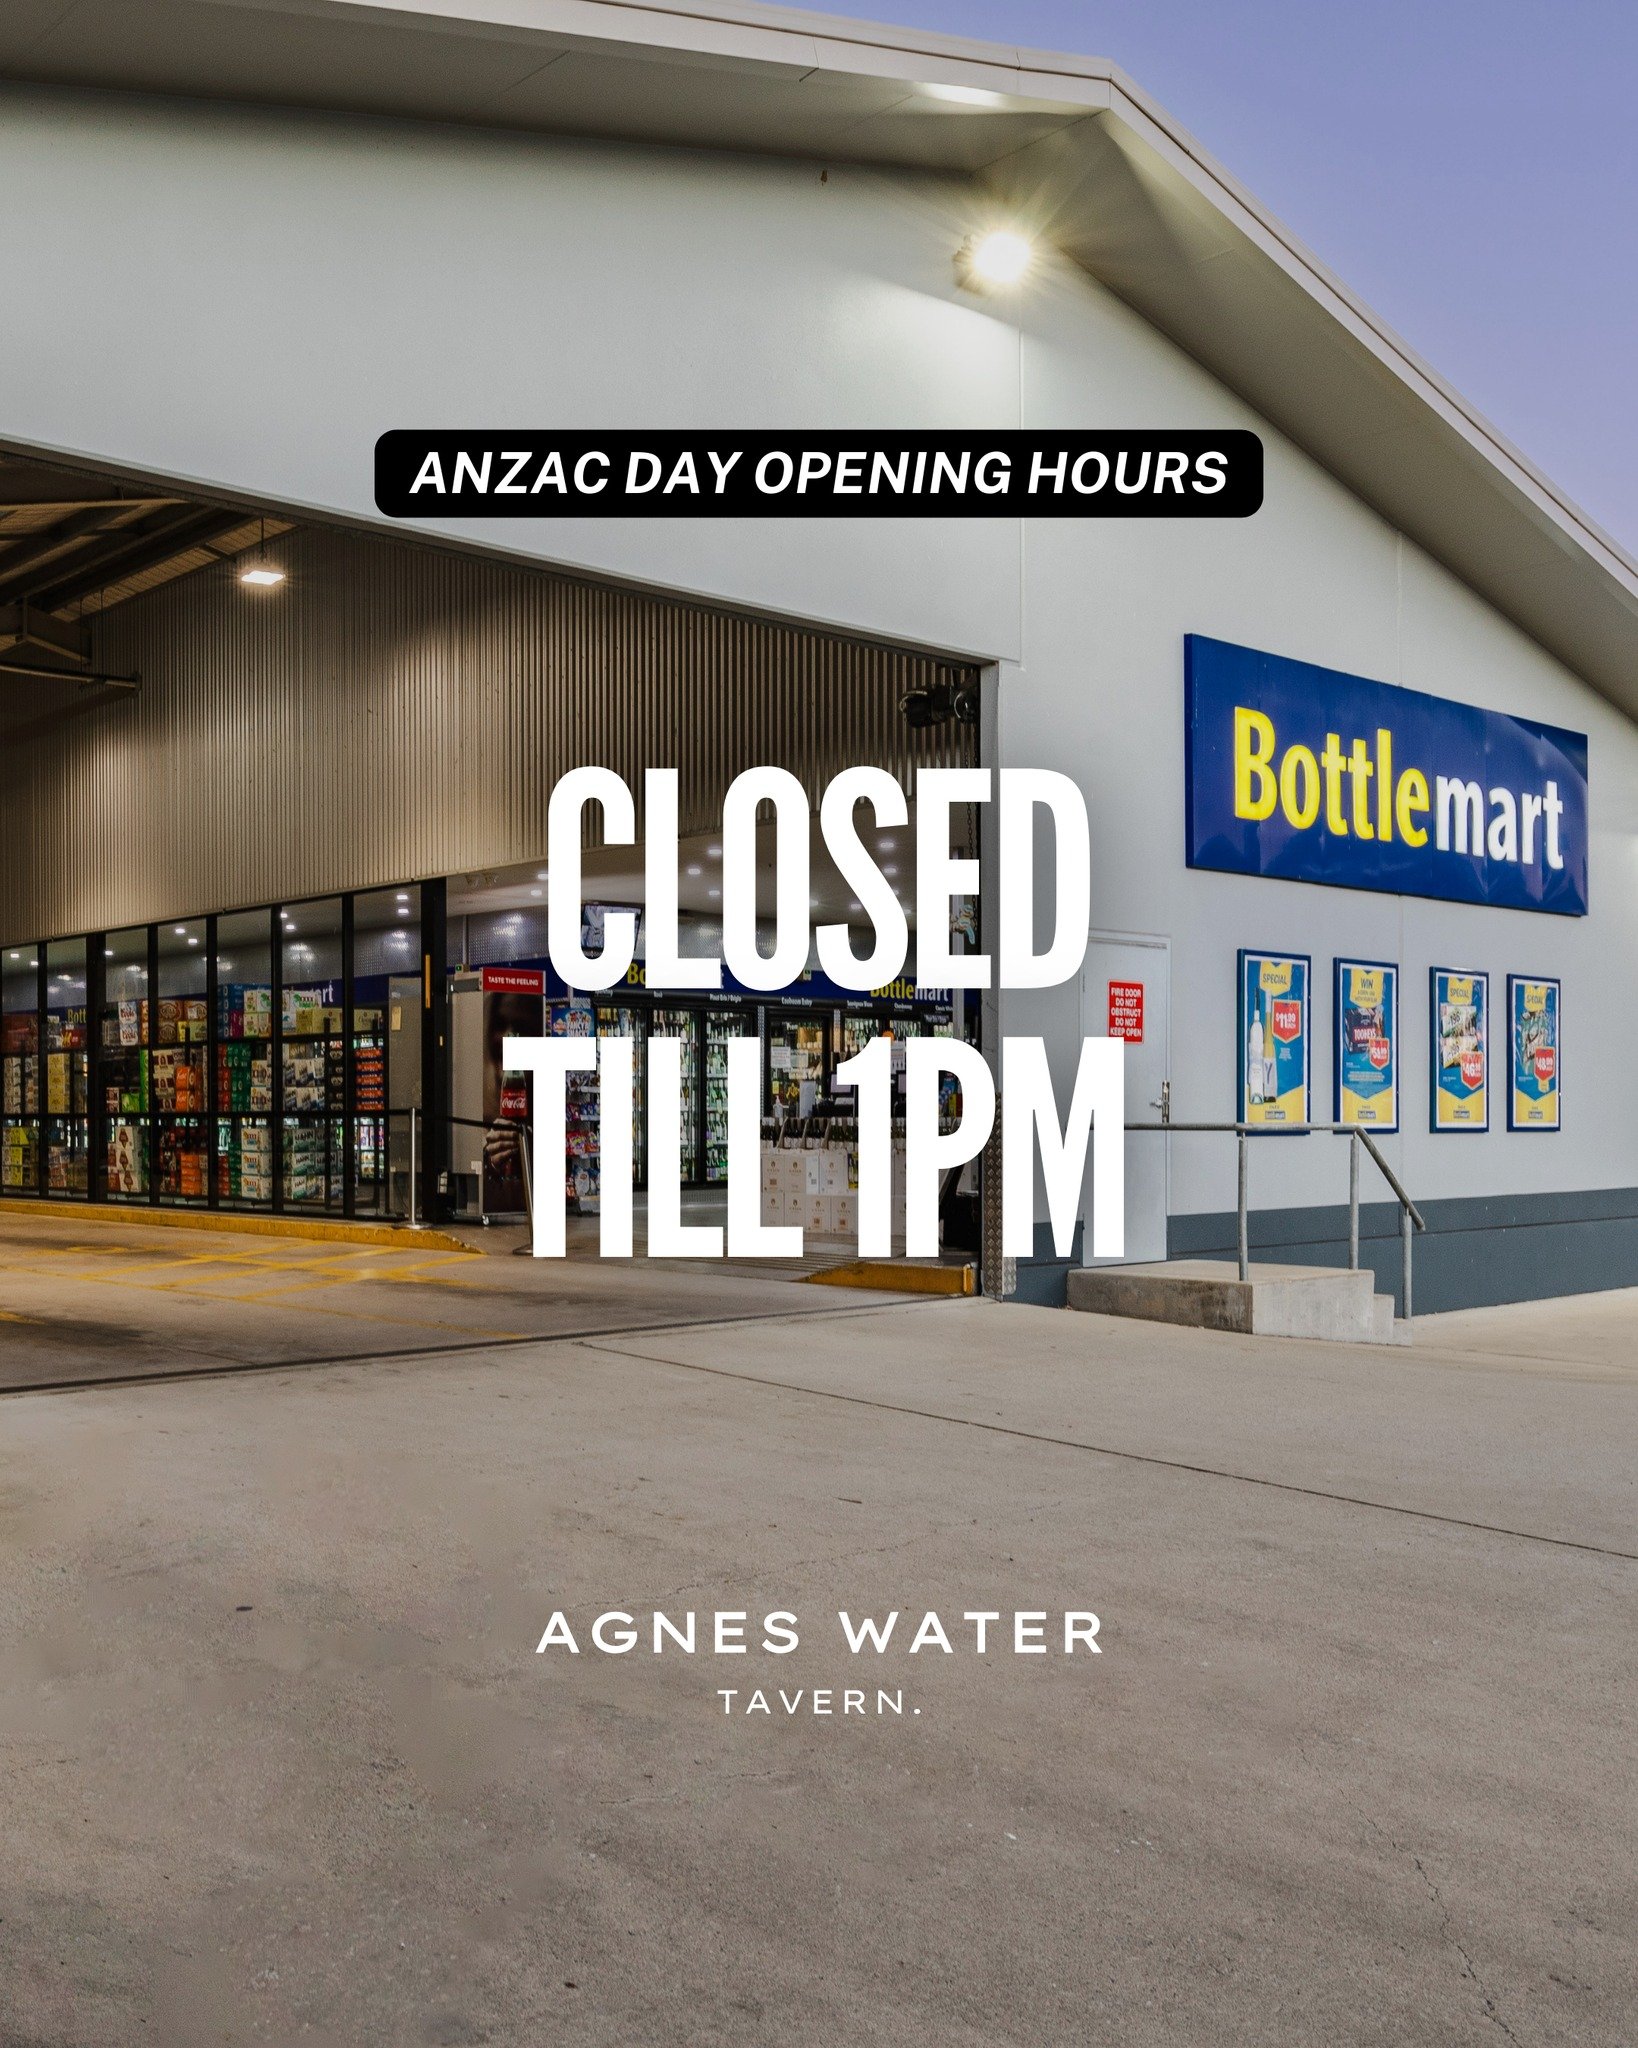 🌹 𝘼𝙣𝙯𝙖𝙘 𝘿𝙖𝙮 𝙃𝙤𝙪𝙧𝙨 𝙐𝙥𝙙𝙖𝙩𝙚 🌹

In observance of Anzac Day, our Bottlemart bottleshops will be opening later than usual, at 1pm tomorrow. 

Thank you for your understanding. We look forward to seeing you after 1pm for all your favour